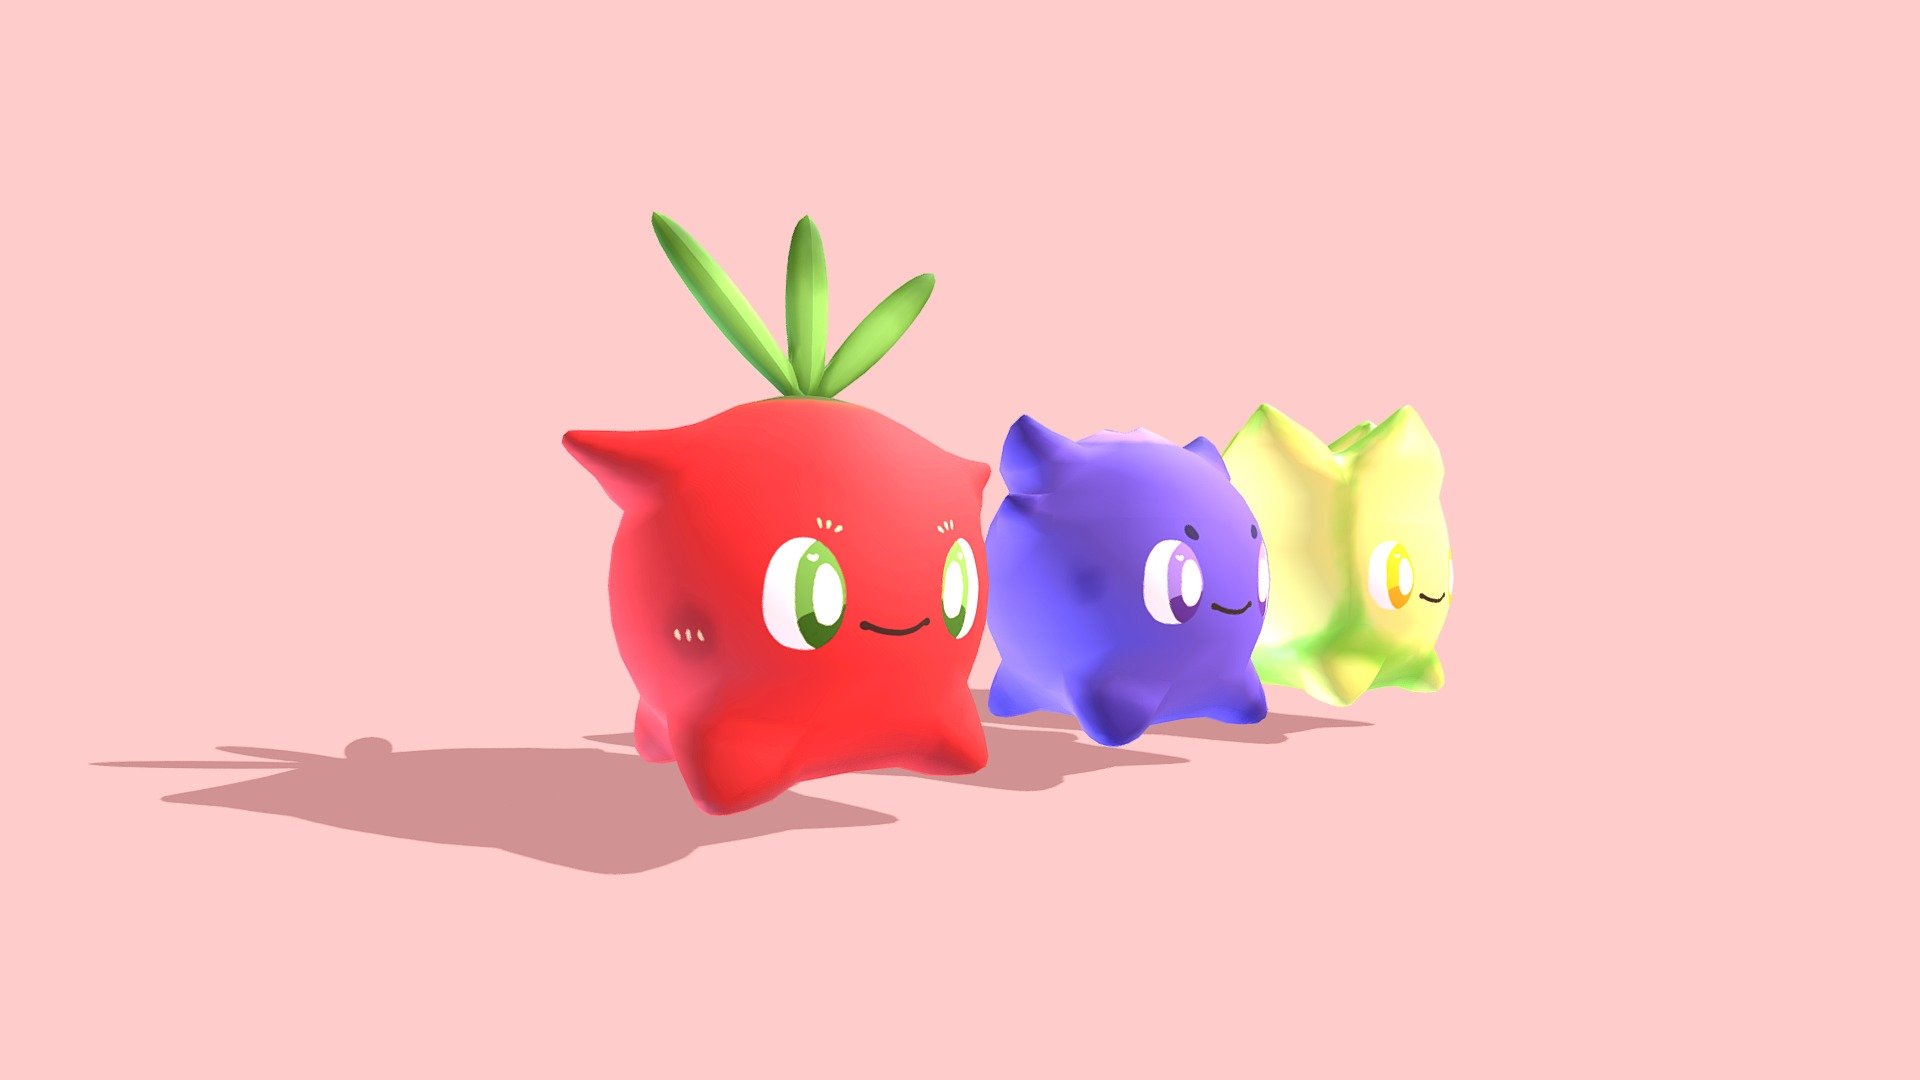 Made these fruity fellas for a VR school assignment. Give them some love, Sketchfab! - Berry Buddies - 3D model by skyyx 3d model